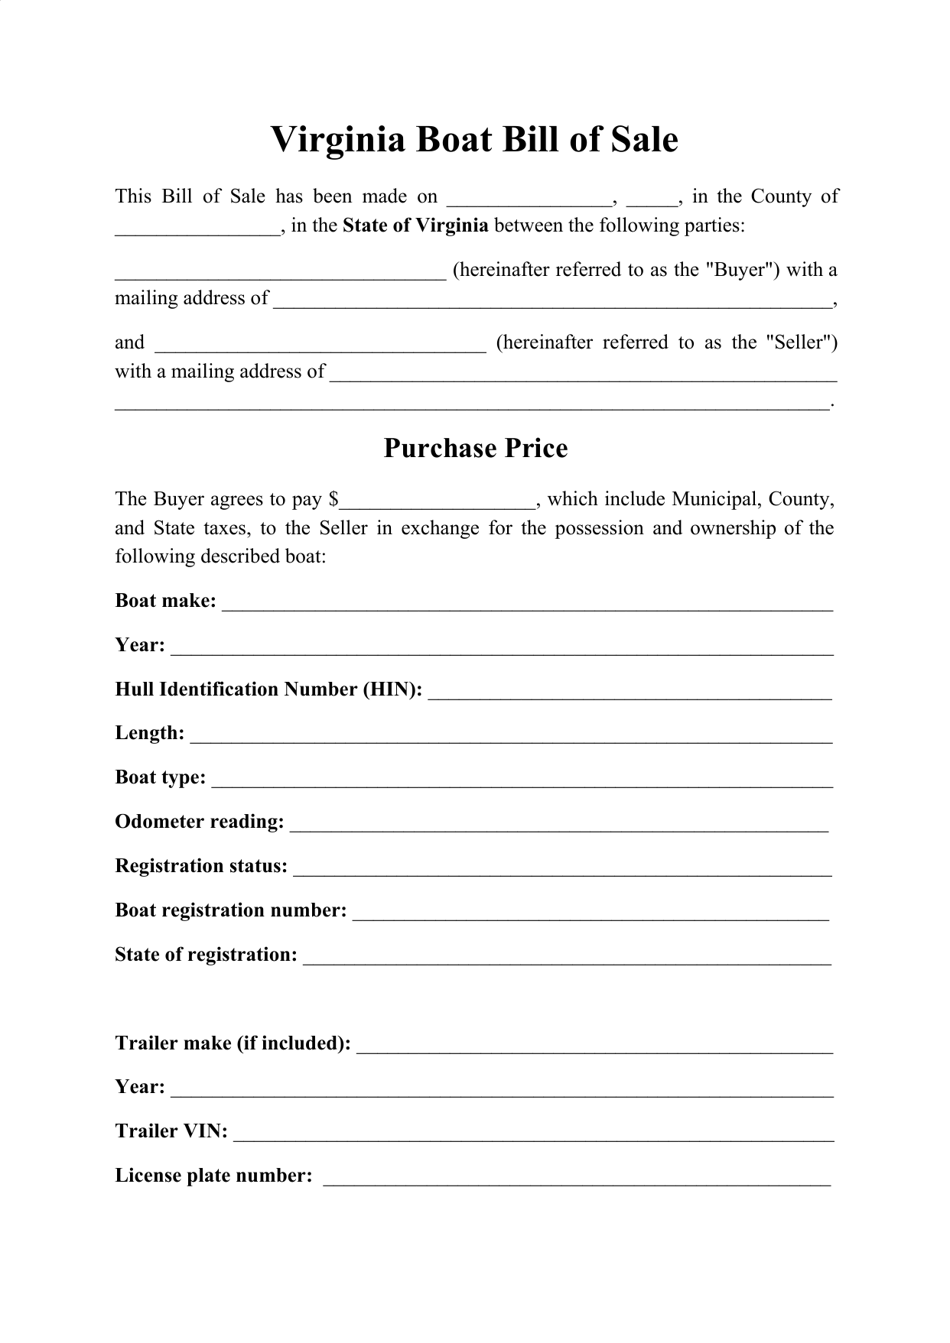 Boat Bill of Sale Form - Virginia, Page 1